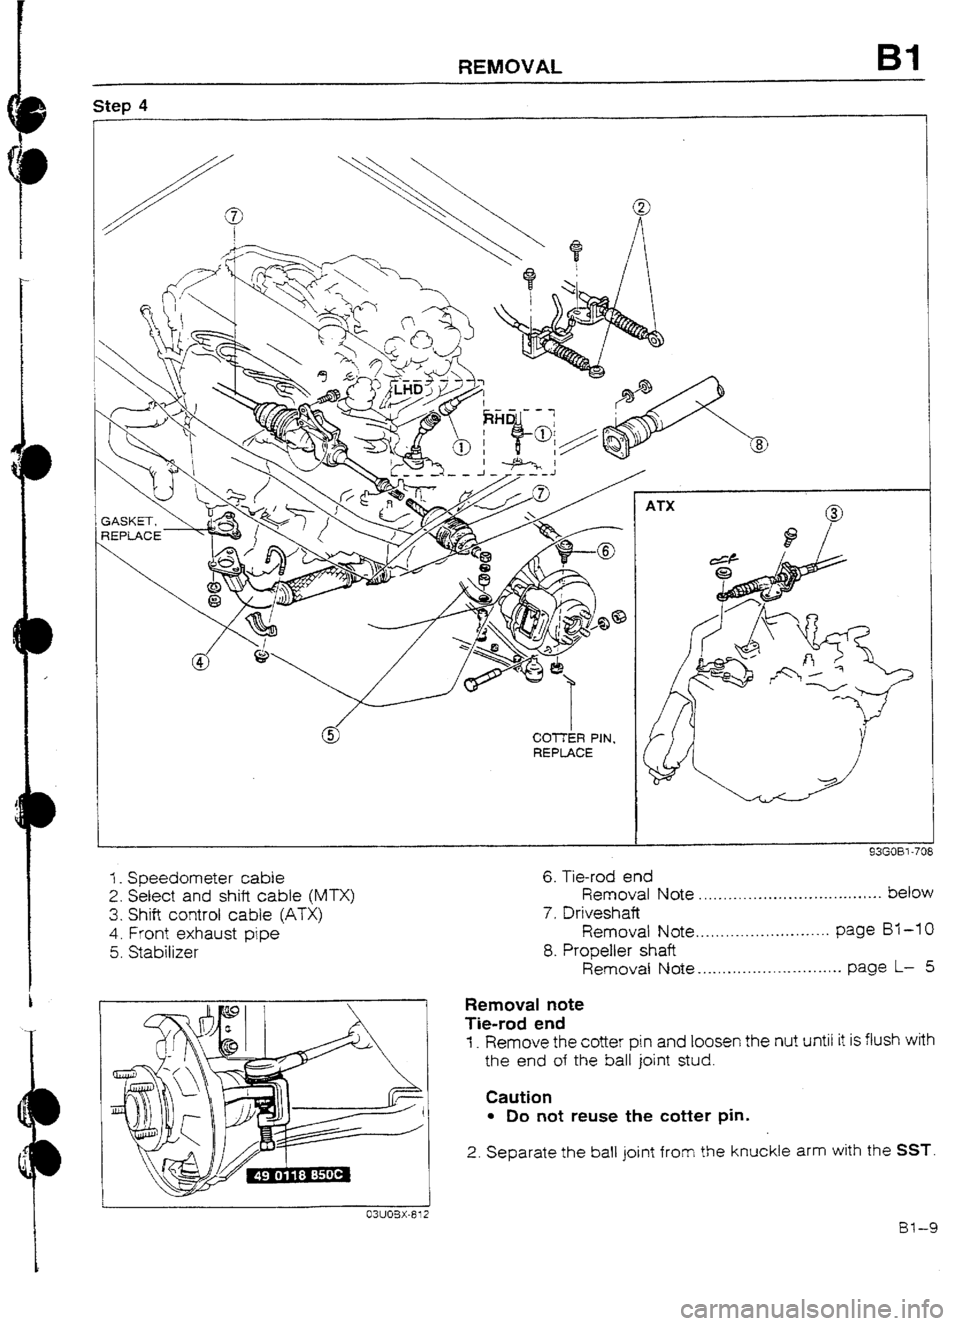 MAZDA 232 1990   Suplement Owners Guide D 
/ 
B 
B II 
’ 
REMOVAL Bl 
I CUTTER PIN. 
REPLACE 
I _ Speedometer cable 
2. Select and shift cable (MTX) 
3. Shift control cable (ATX) 
4. Front exhaust pipe 
5. Stabilizer 
ATX 
0 
1 93GOBl-708